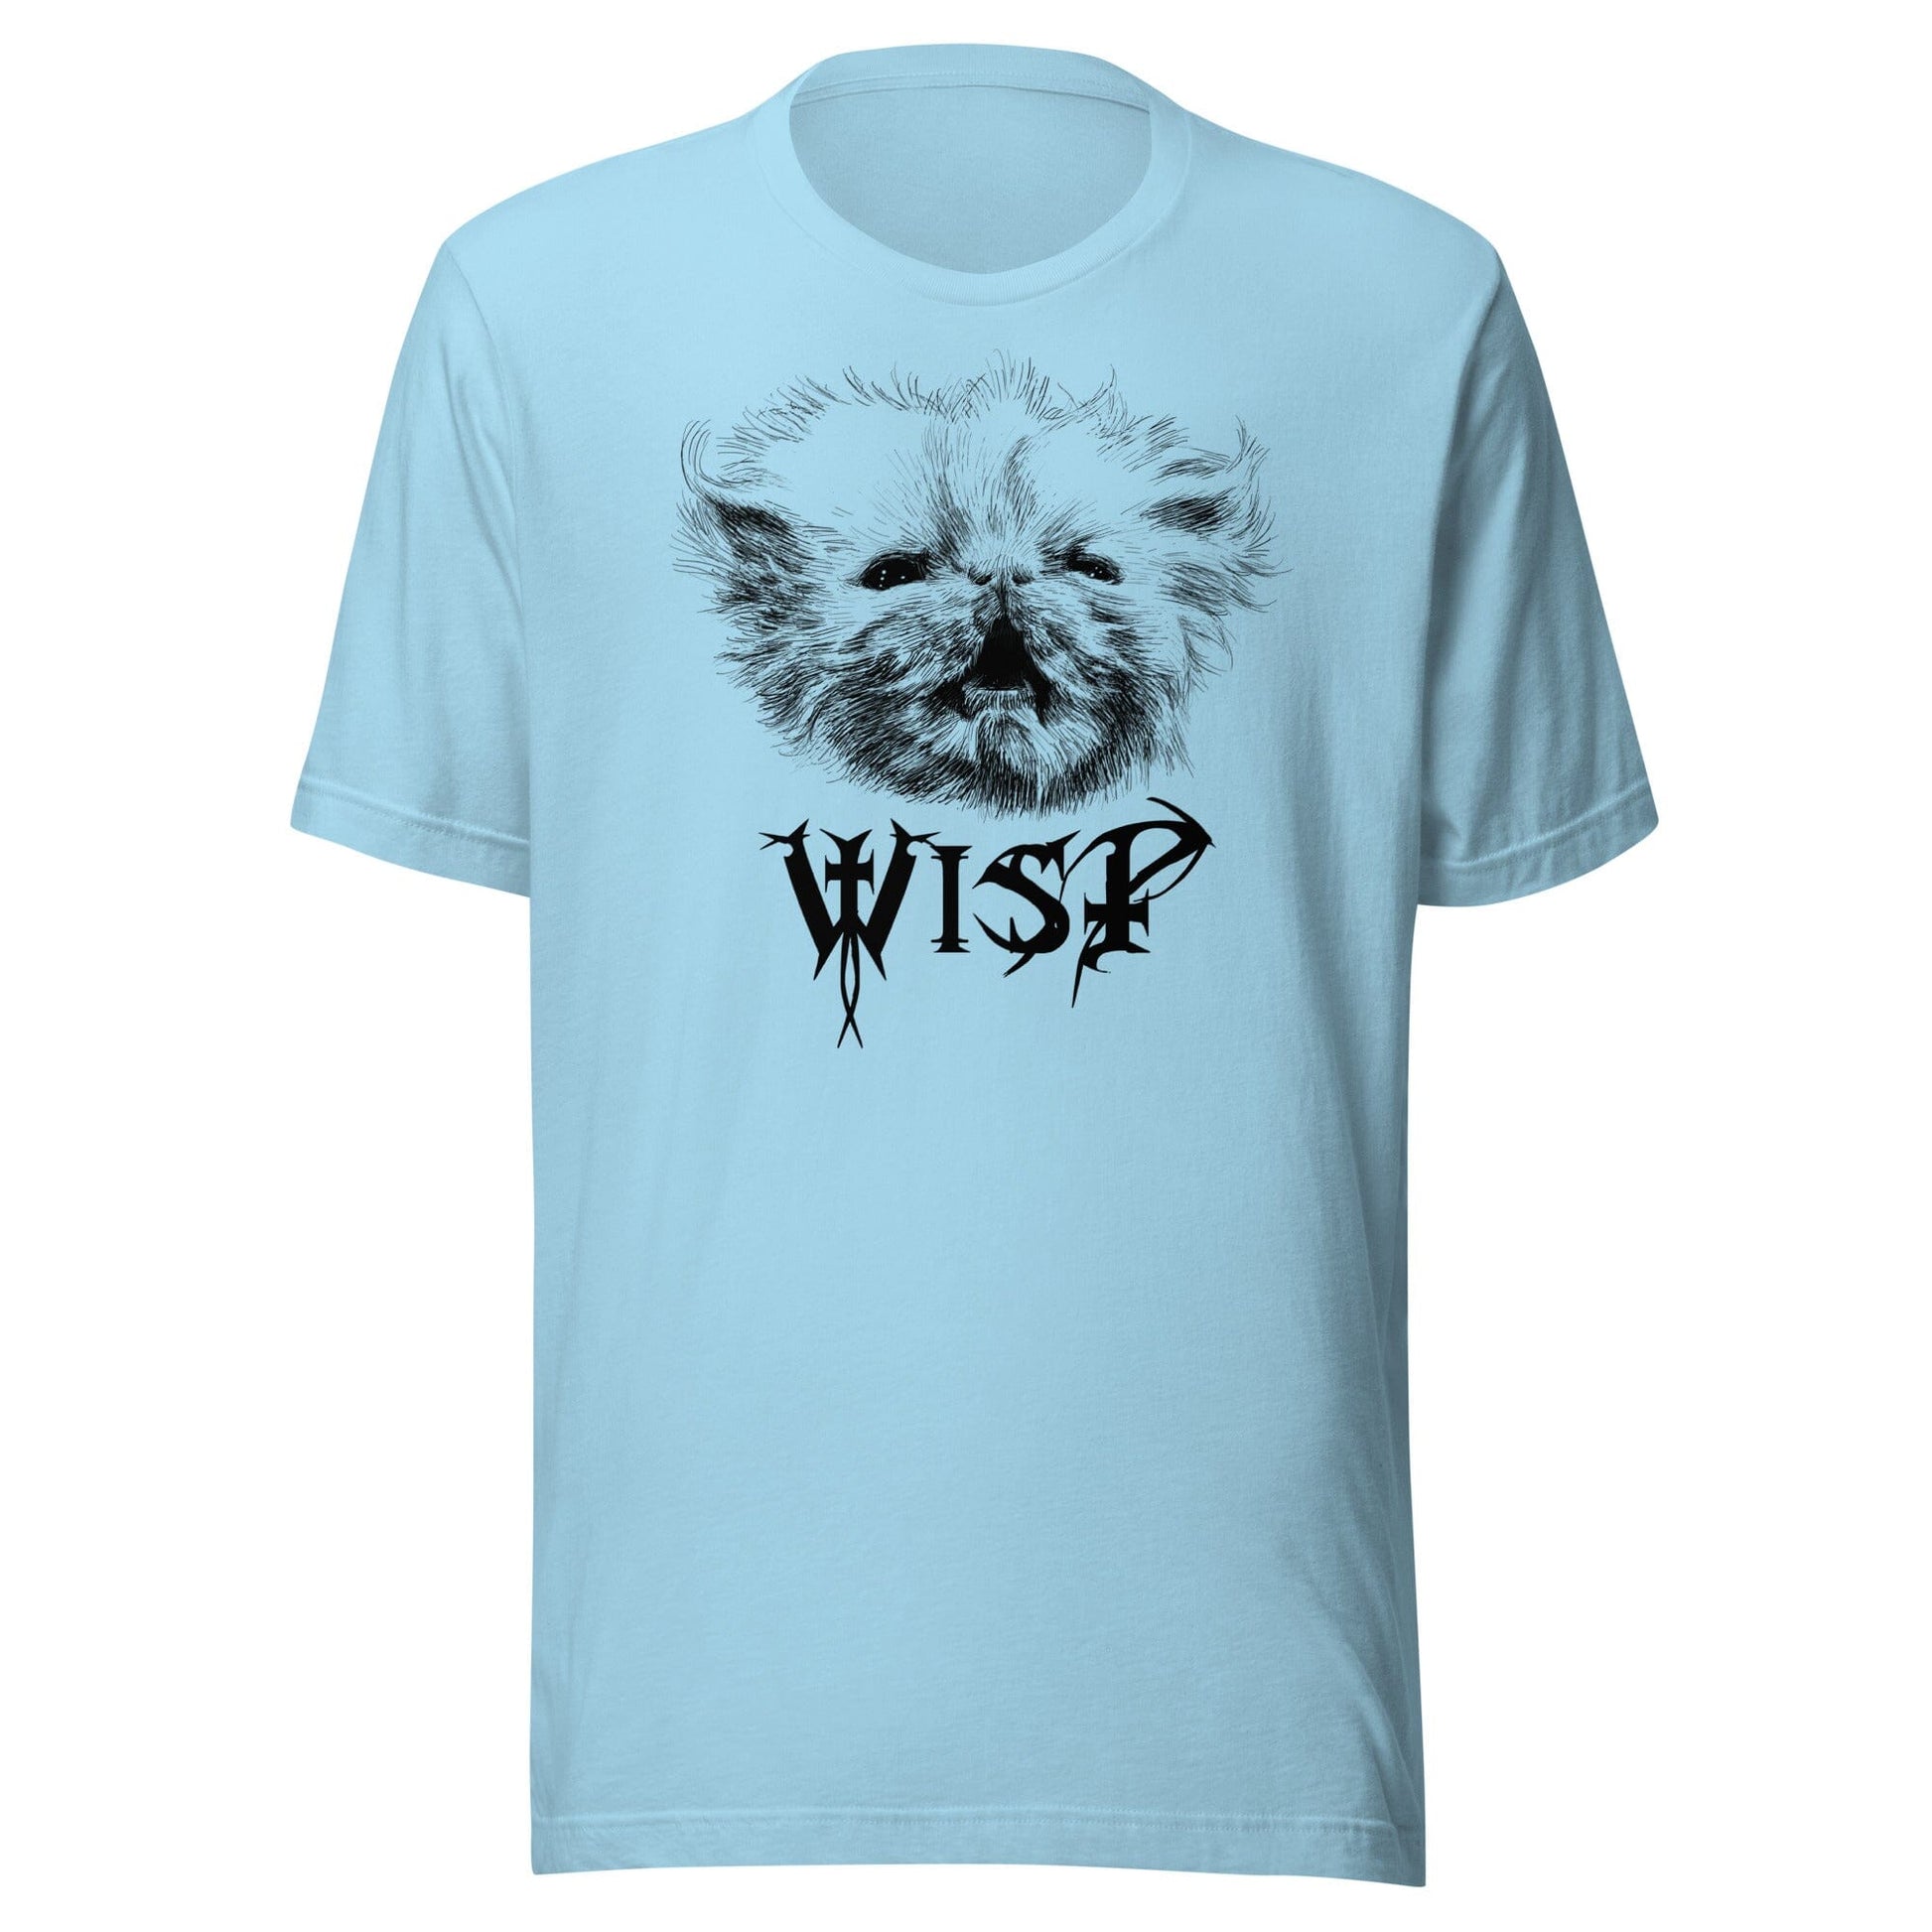 Metal Wisp T-Shirt [Unfoiled] (All net proceeds go to Rags to Riches Animal Rescue) JoyousJoyfulJoyness Ocean Blue S 